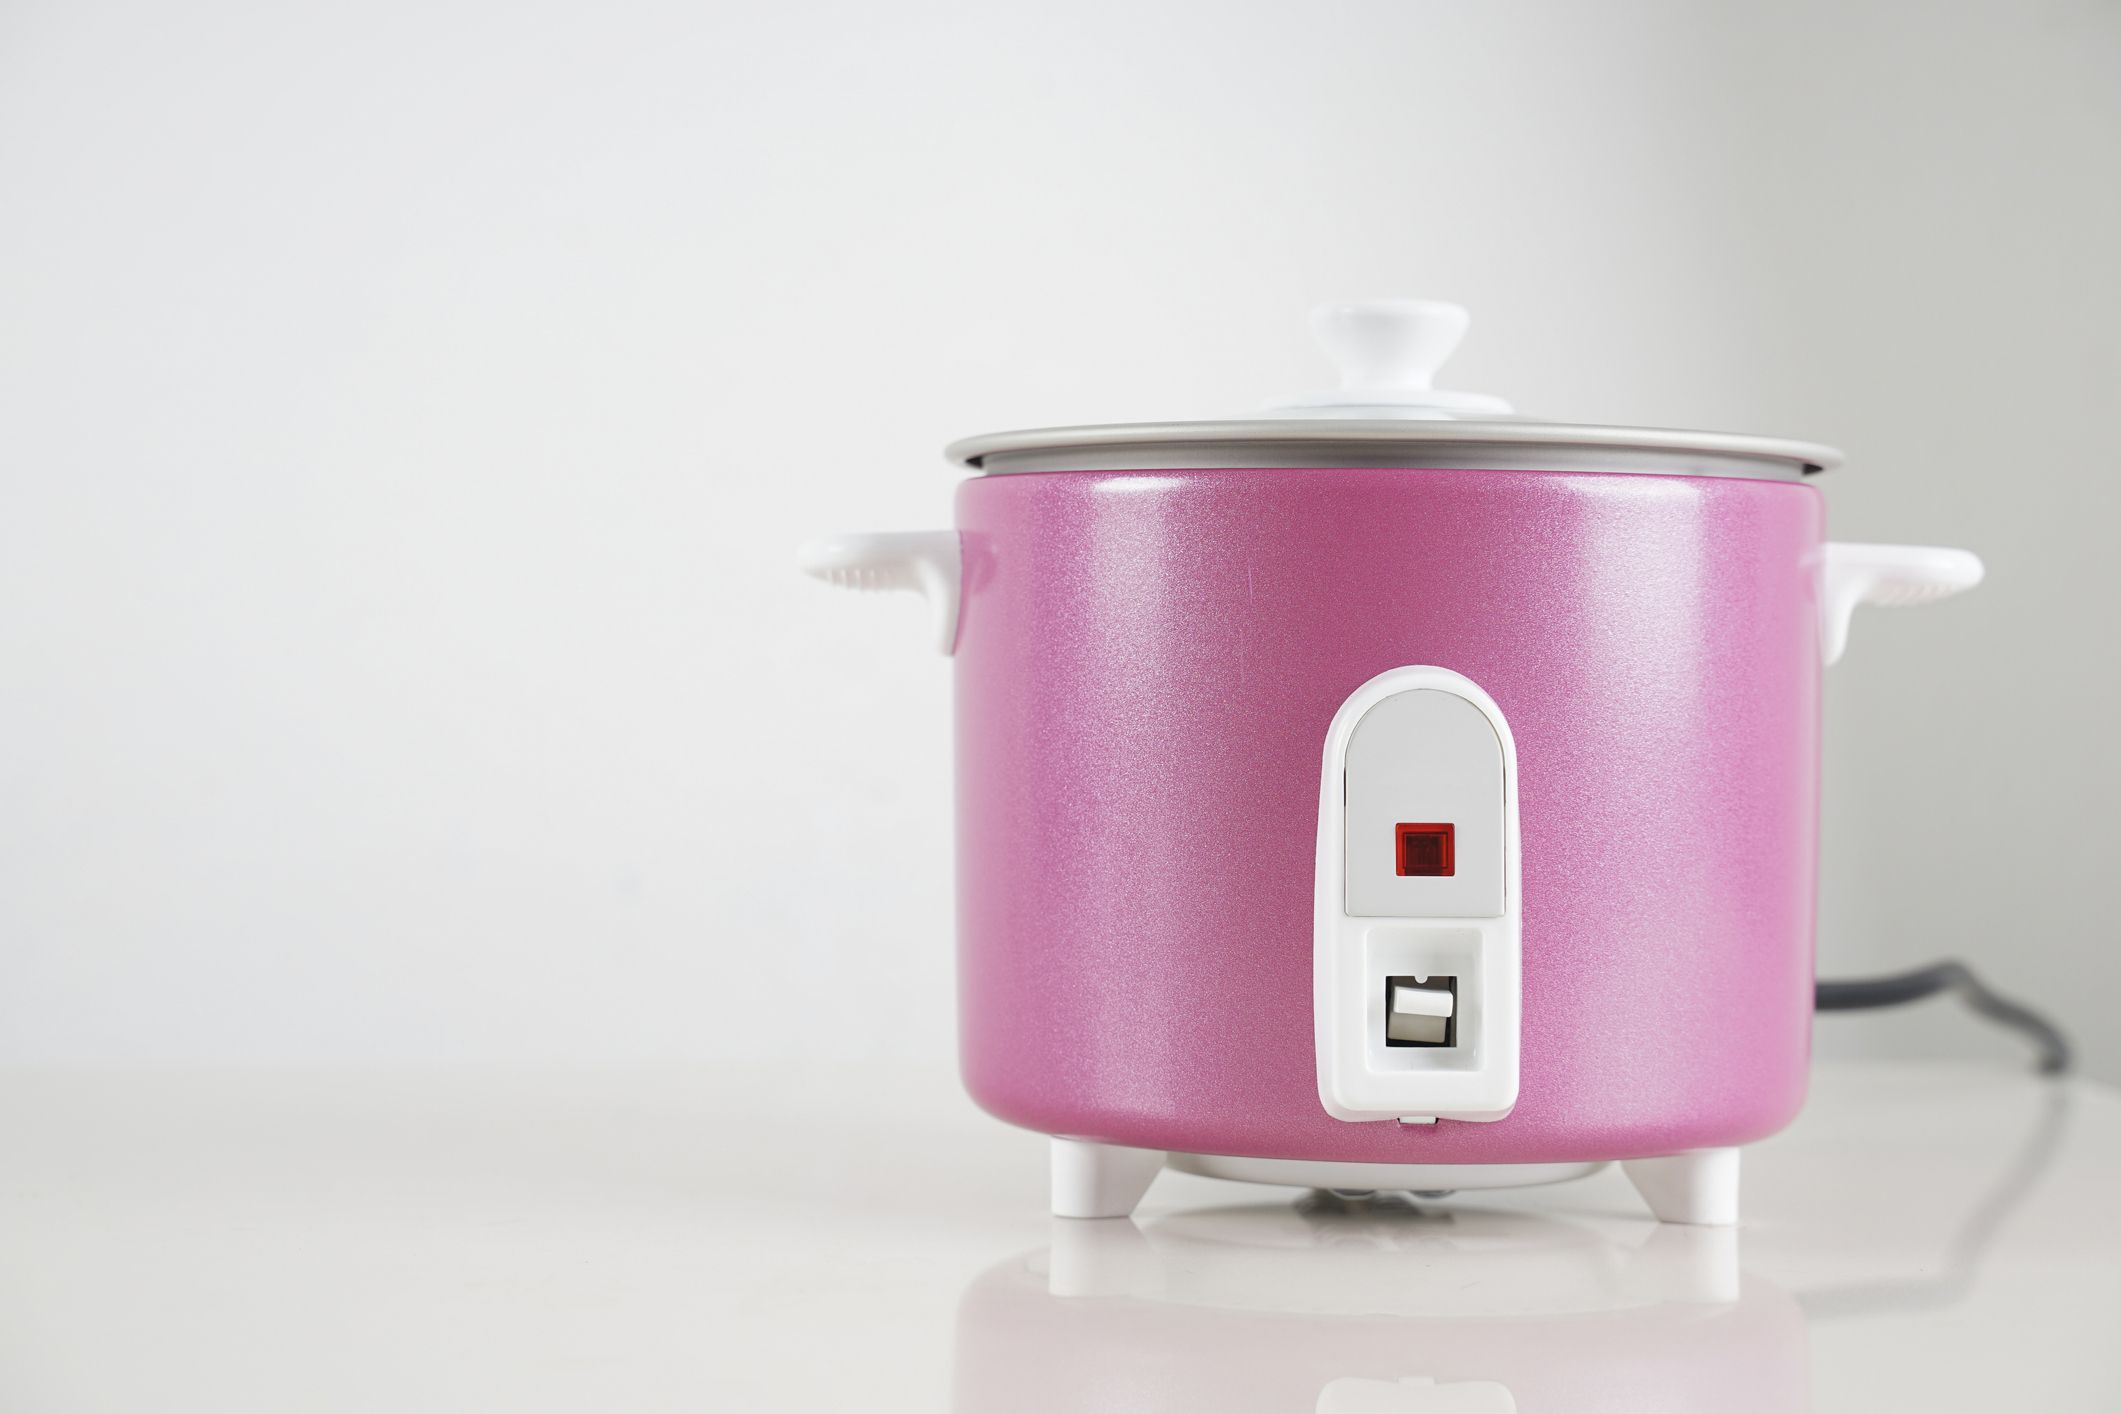 What can you cook in a rice cooker? 7 surprising things you didn't know